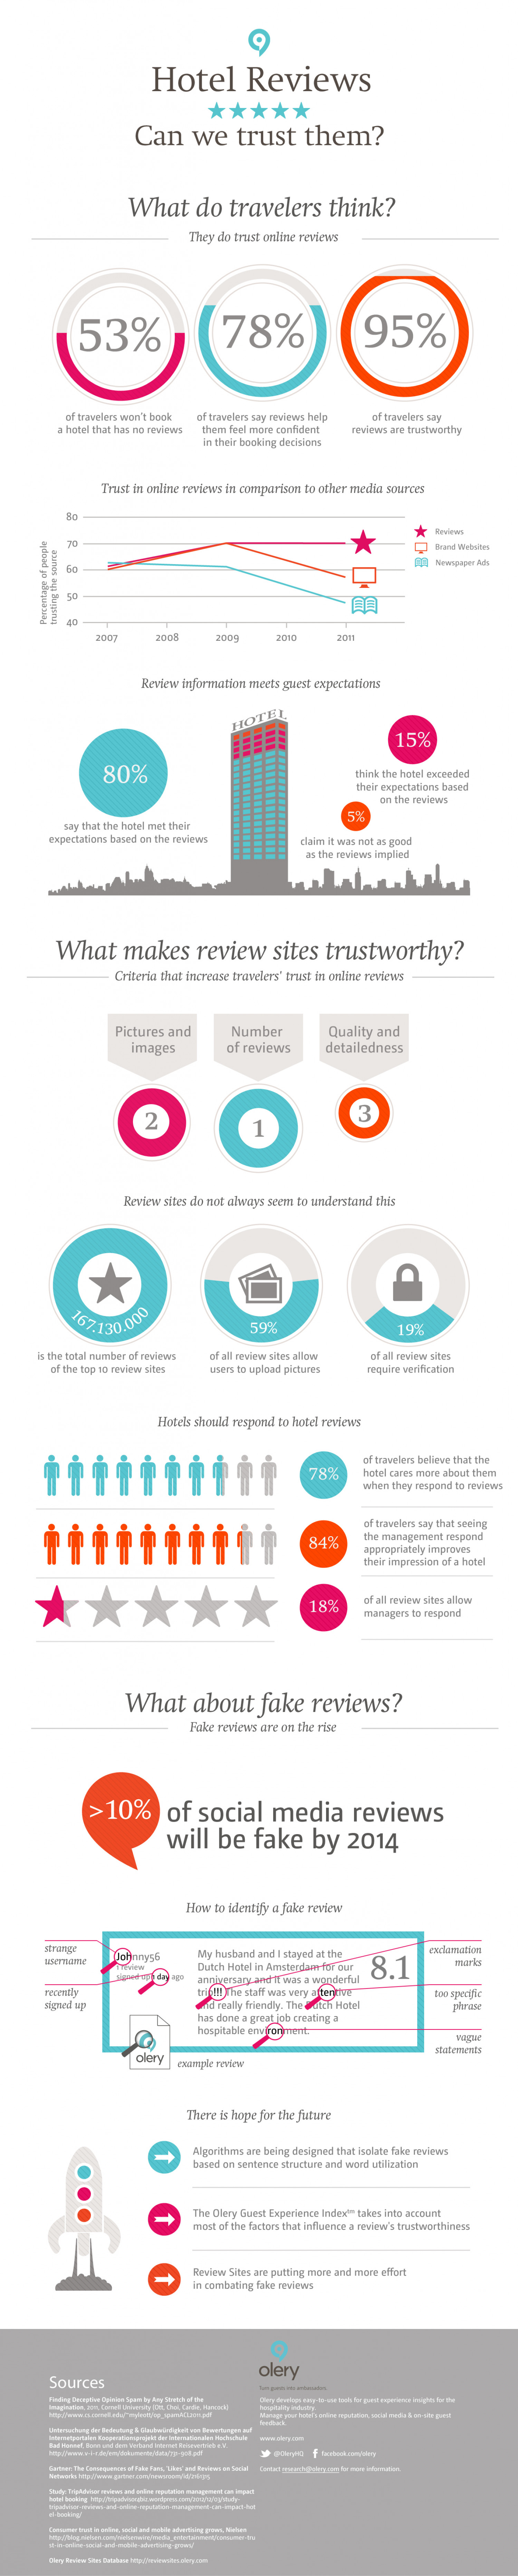 Hotel Reviews: can we trust them? Infographic